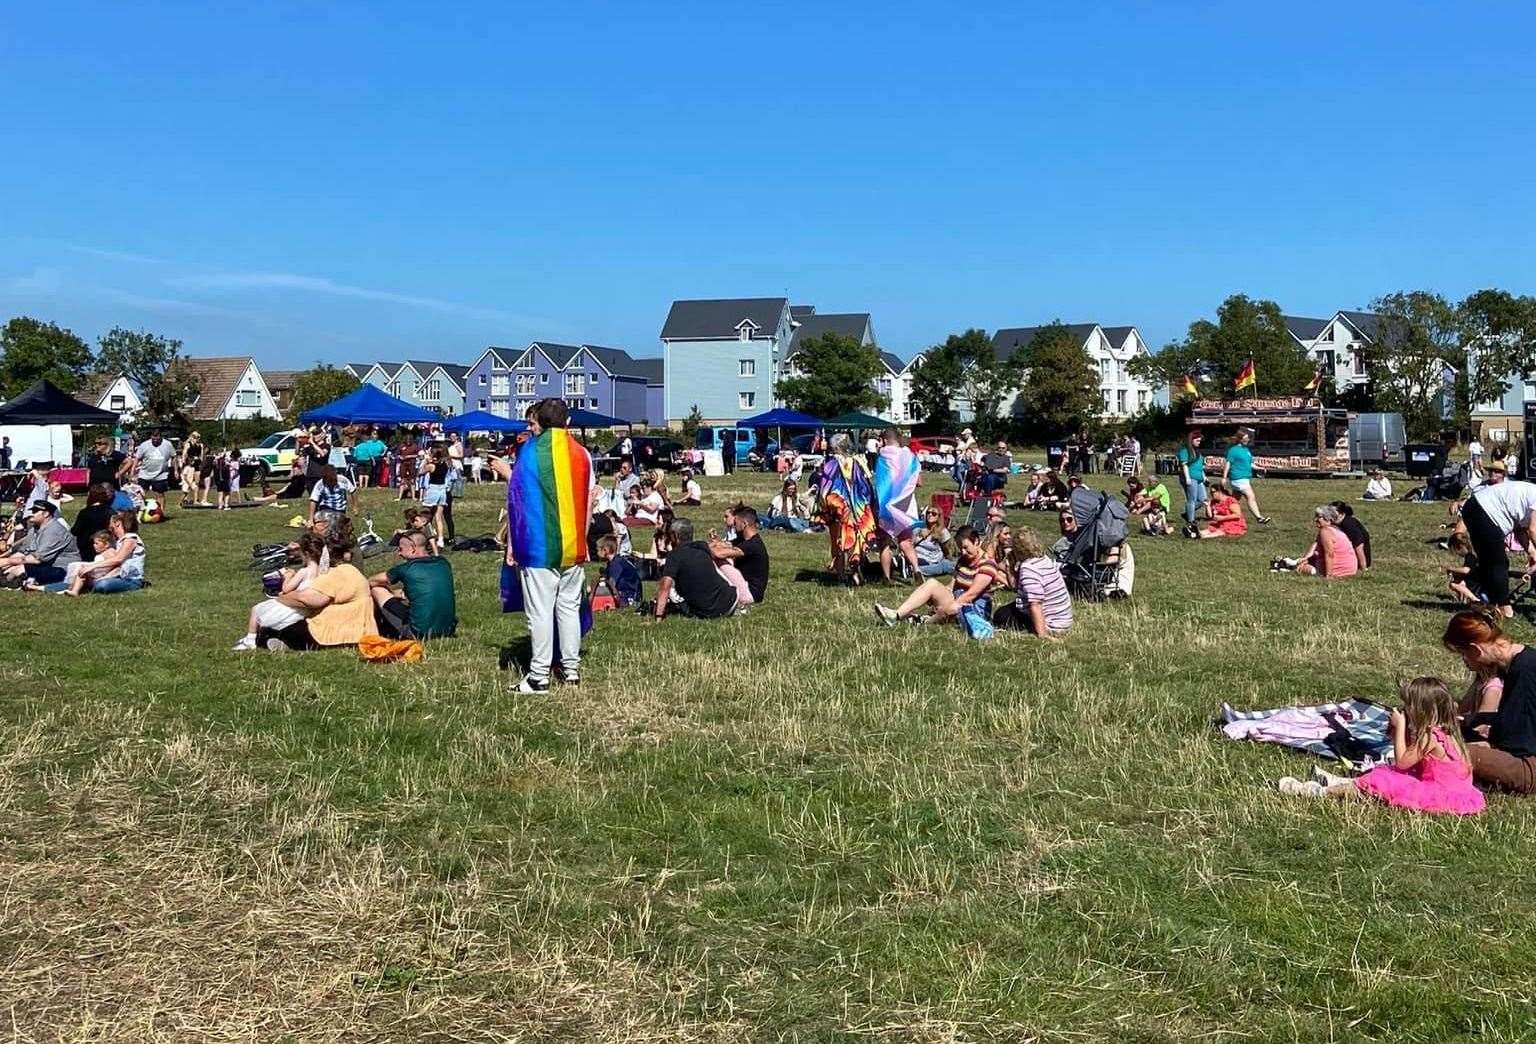 This year's Swale Pride has been hailed another success